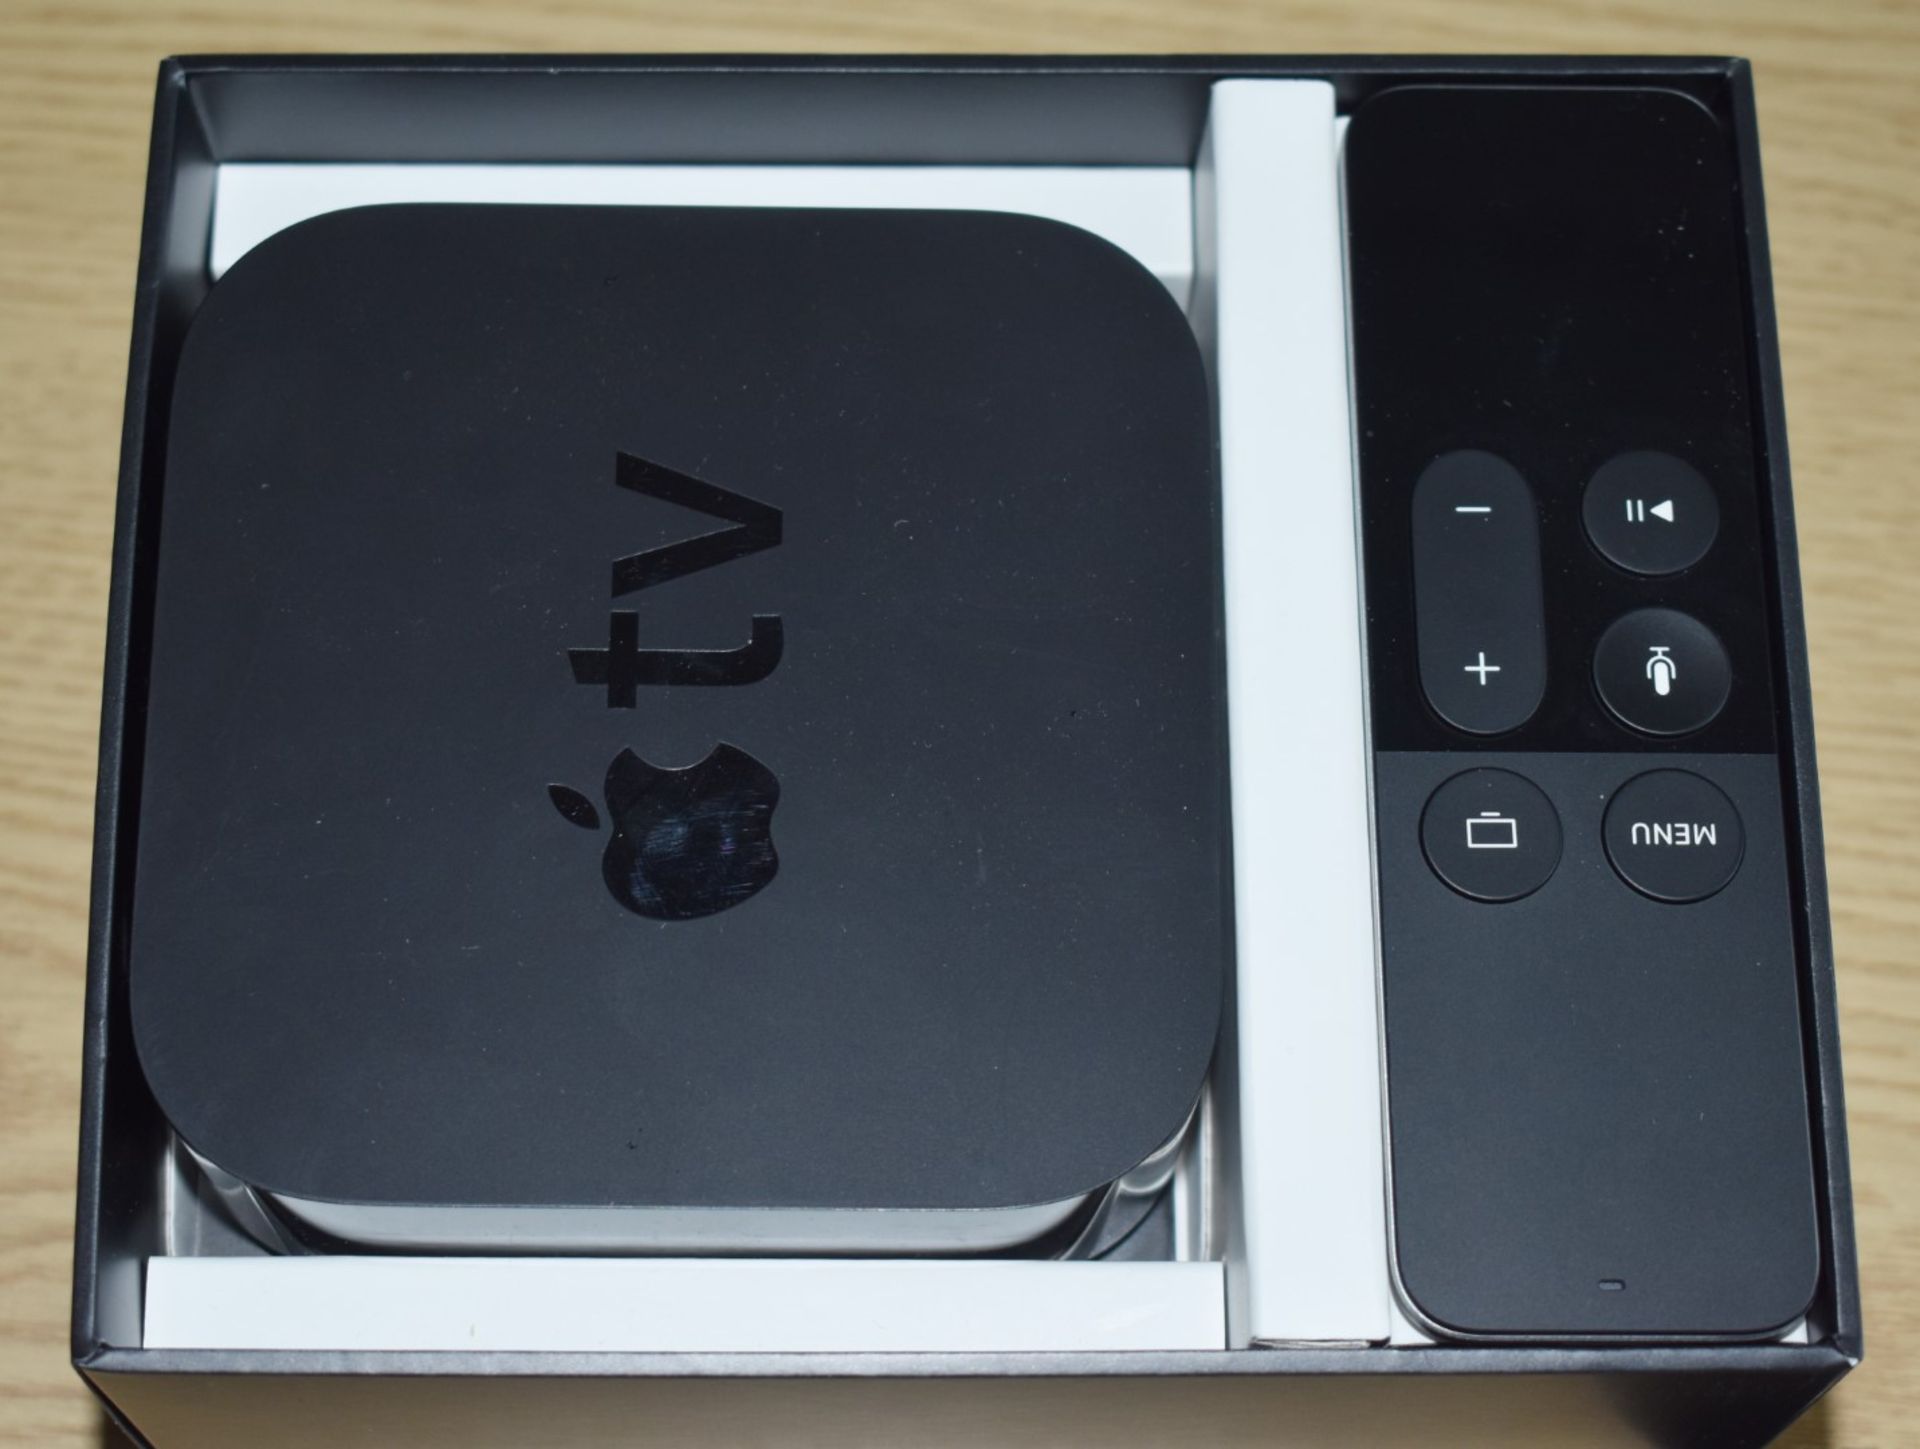 1 x Apple TV Unit With Original Box and Remote Control - 32gb Storage Capacity - Model MGYS2LL/A - - Image 2 of 6